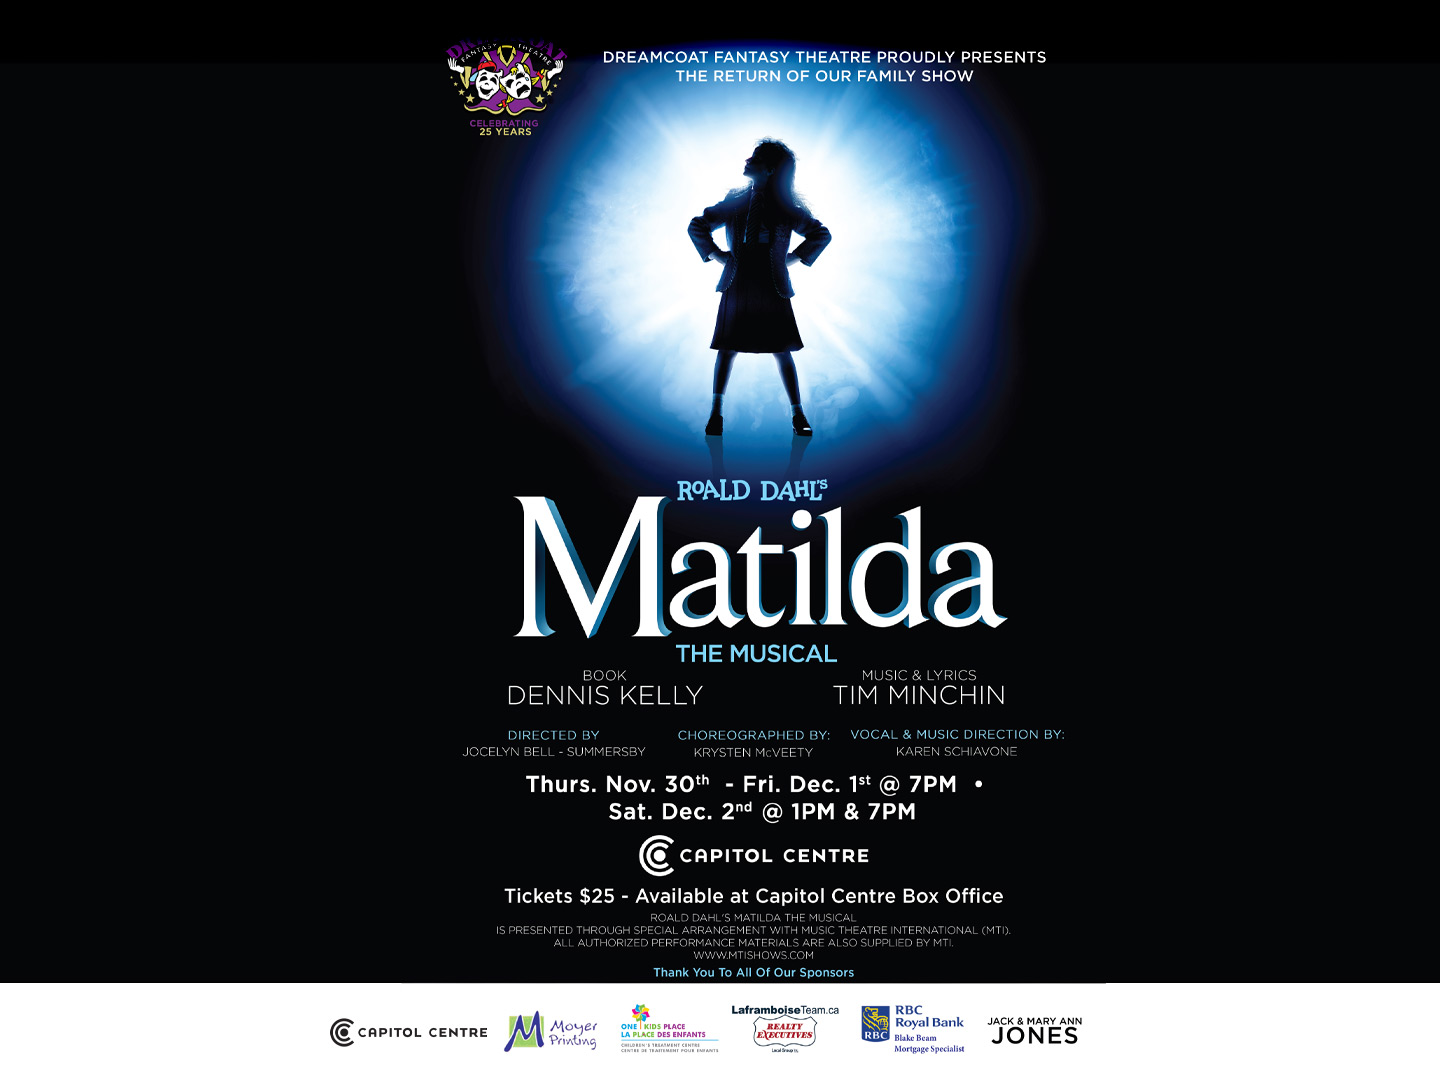 Dreamcoat presents Matilda the Musical